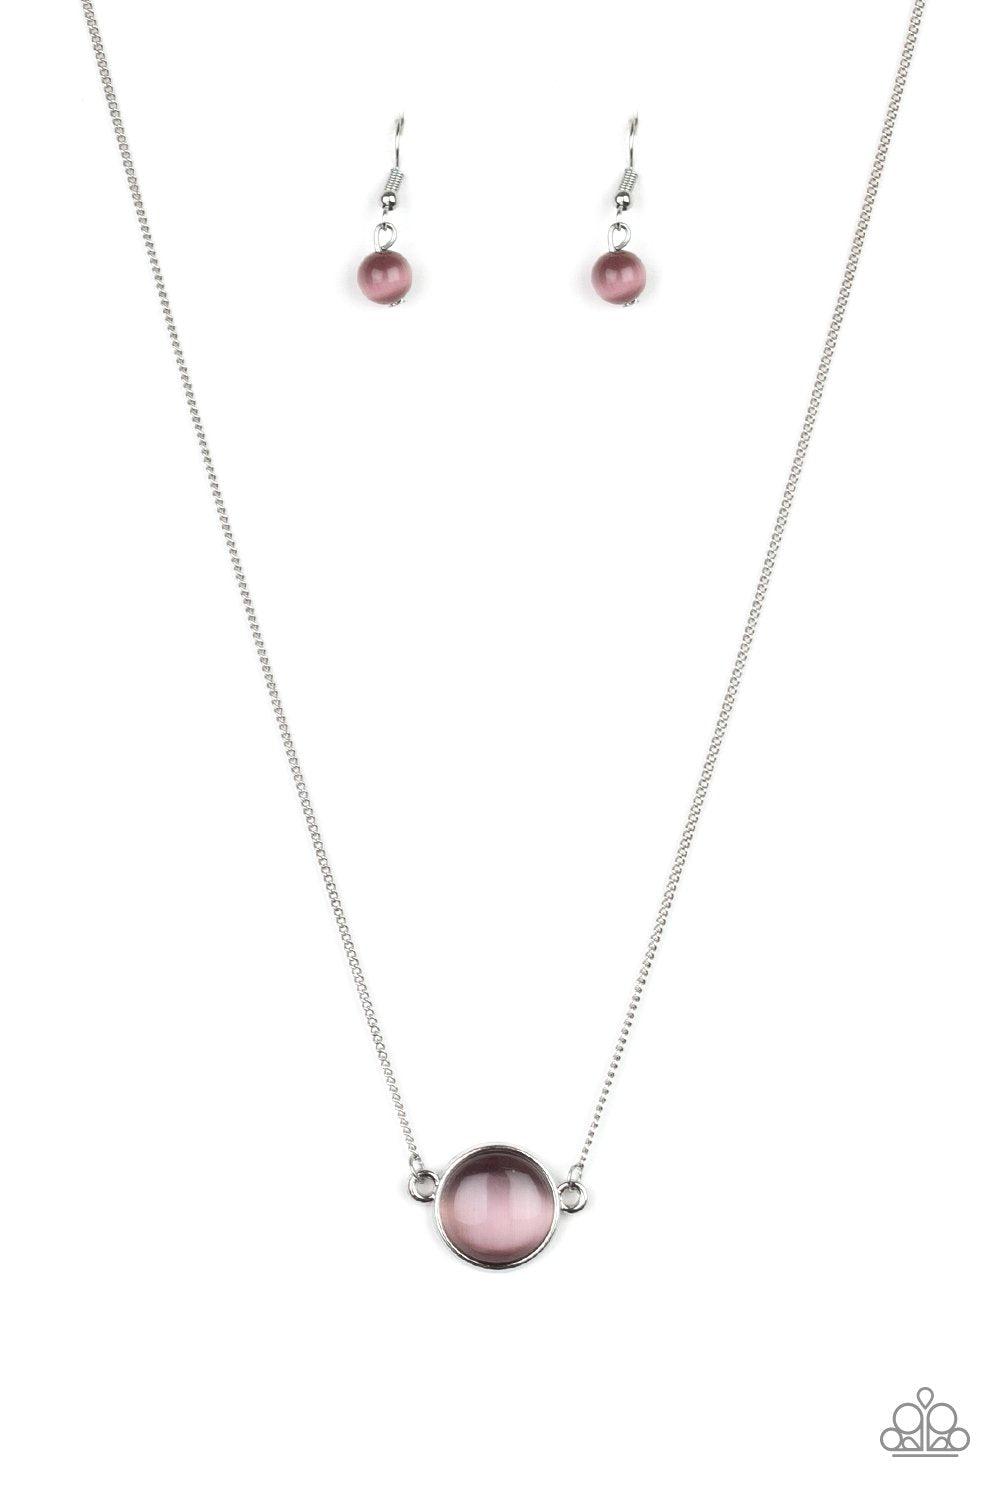 Rose-Colored Glasses Purple Cat's Eye Stone Necklace - Paparazzi Accessories- lightbox - CarasShop.com - $5 Jewelry by Cara Jewels